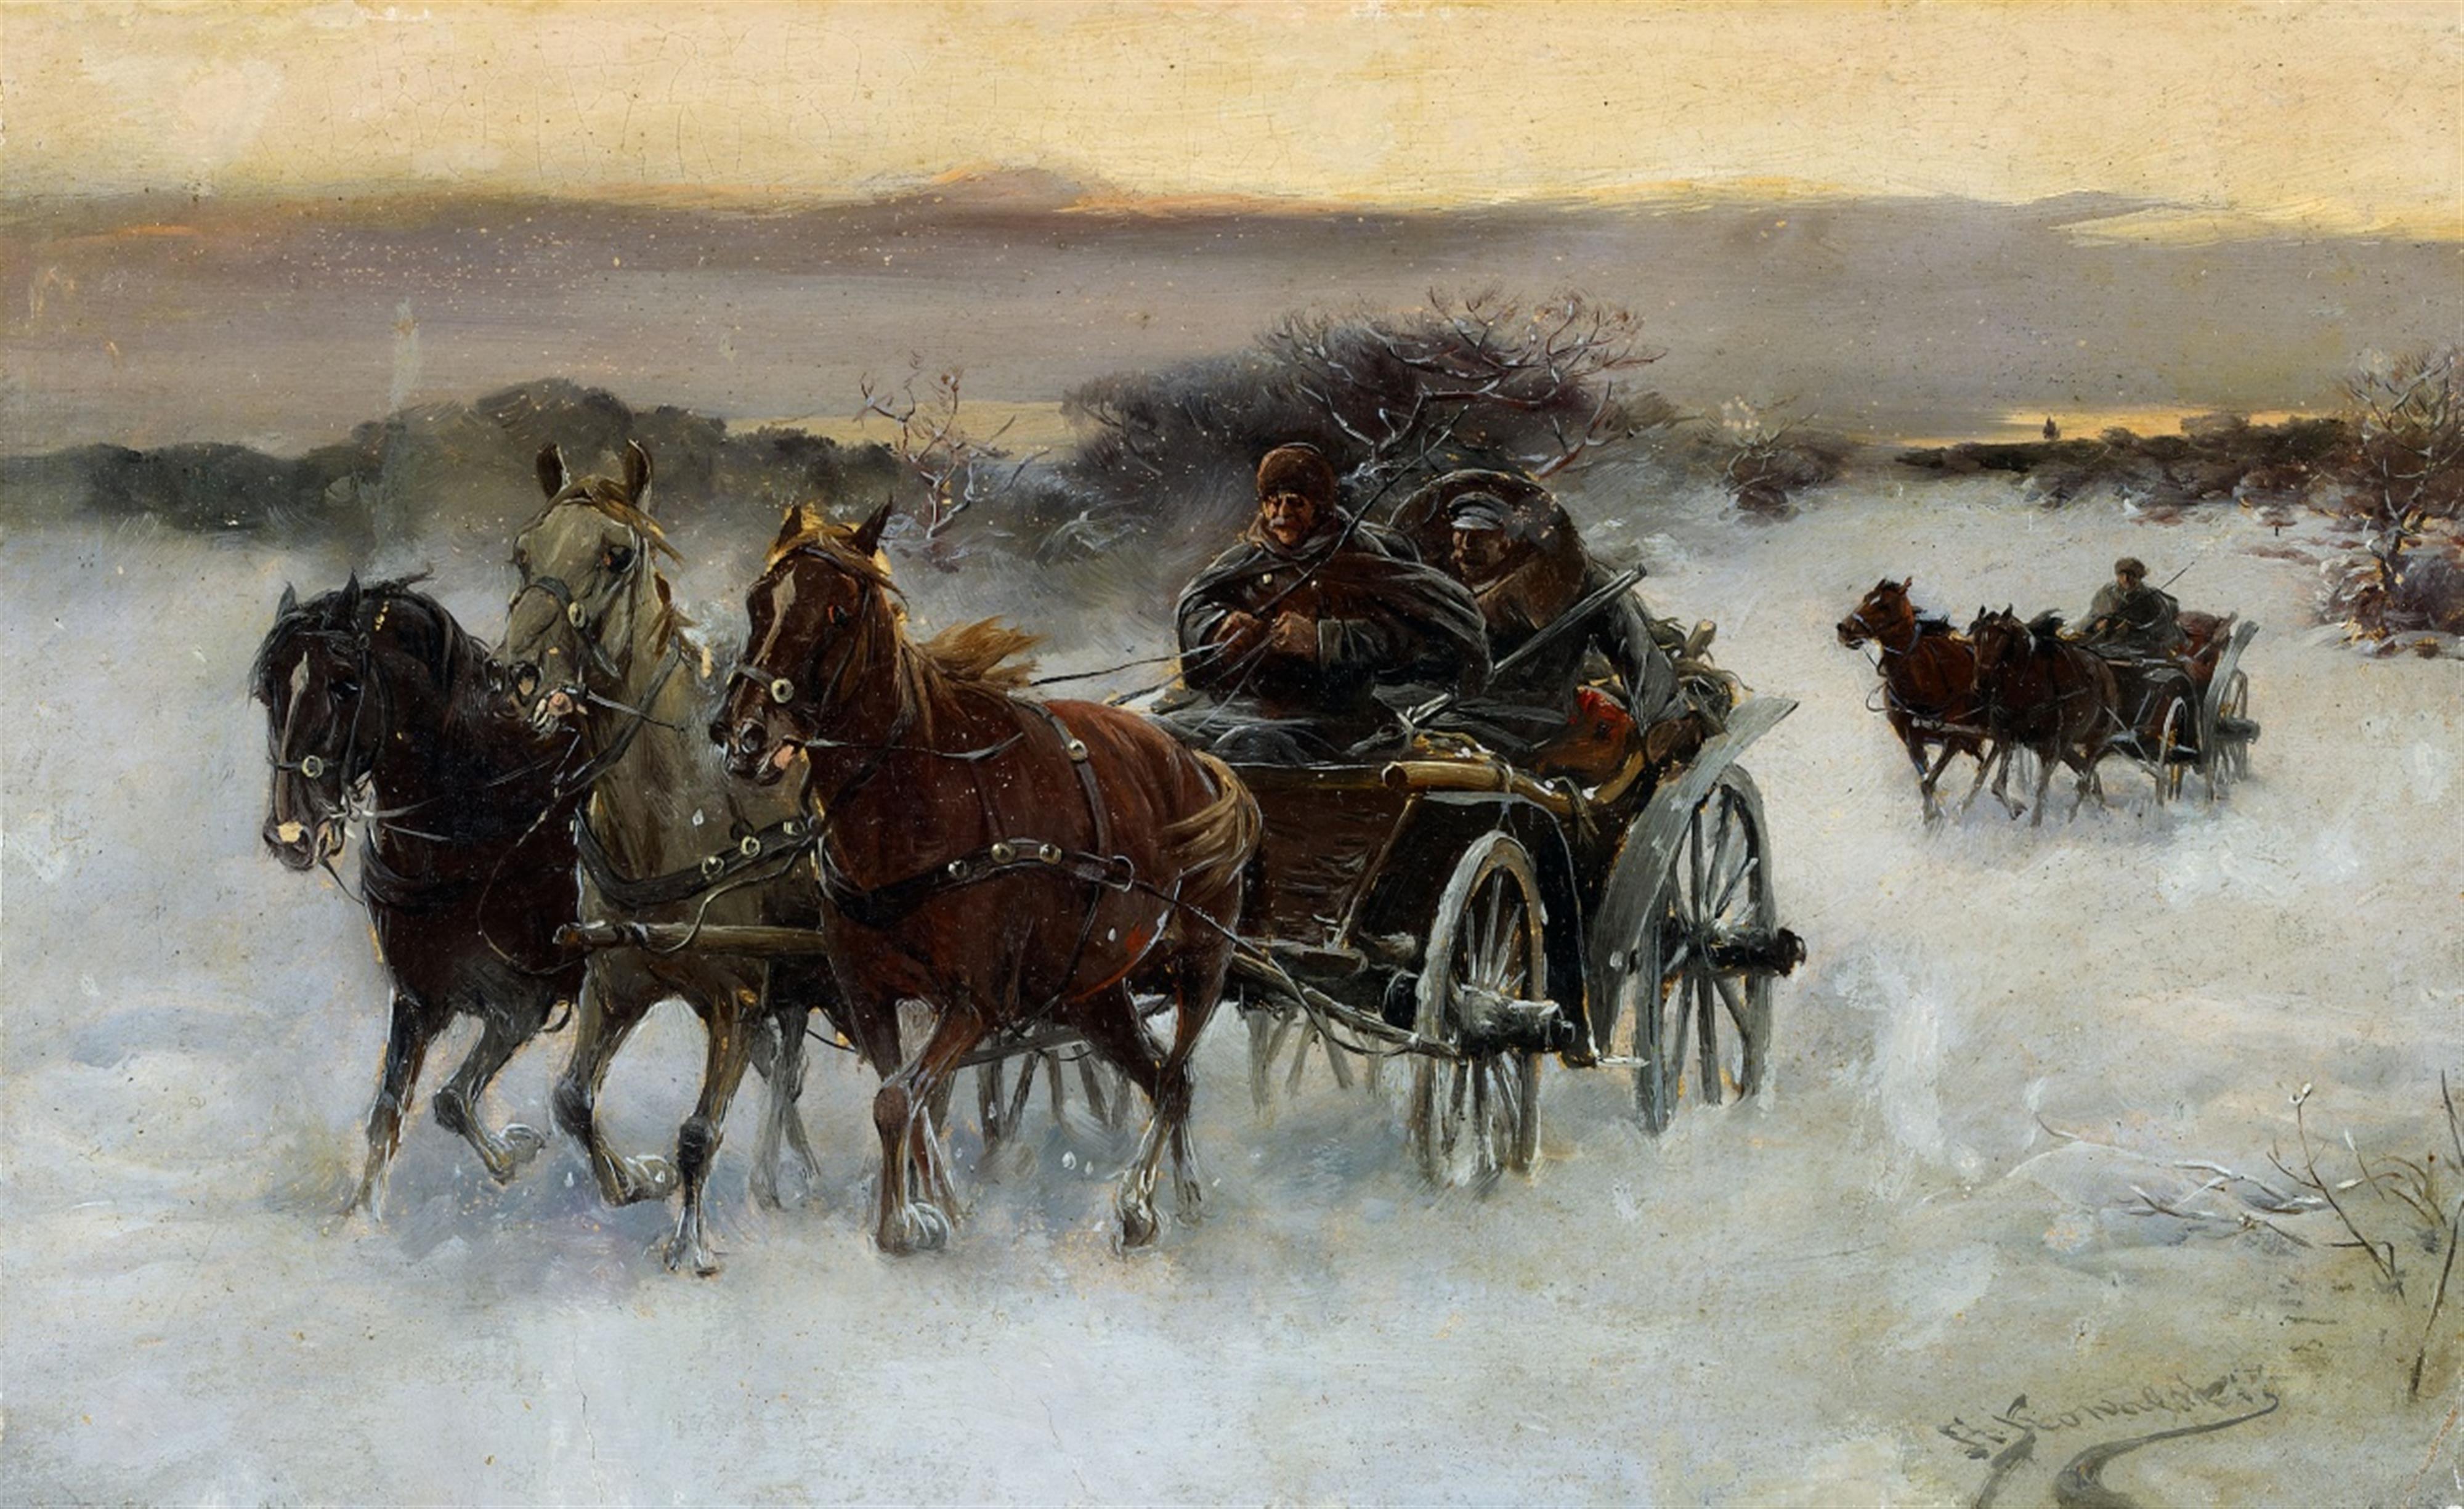 Alfred von Wierusz-Kowalski - An Early Morning Hunting Expedition in a Snowy Landscape - image-1